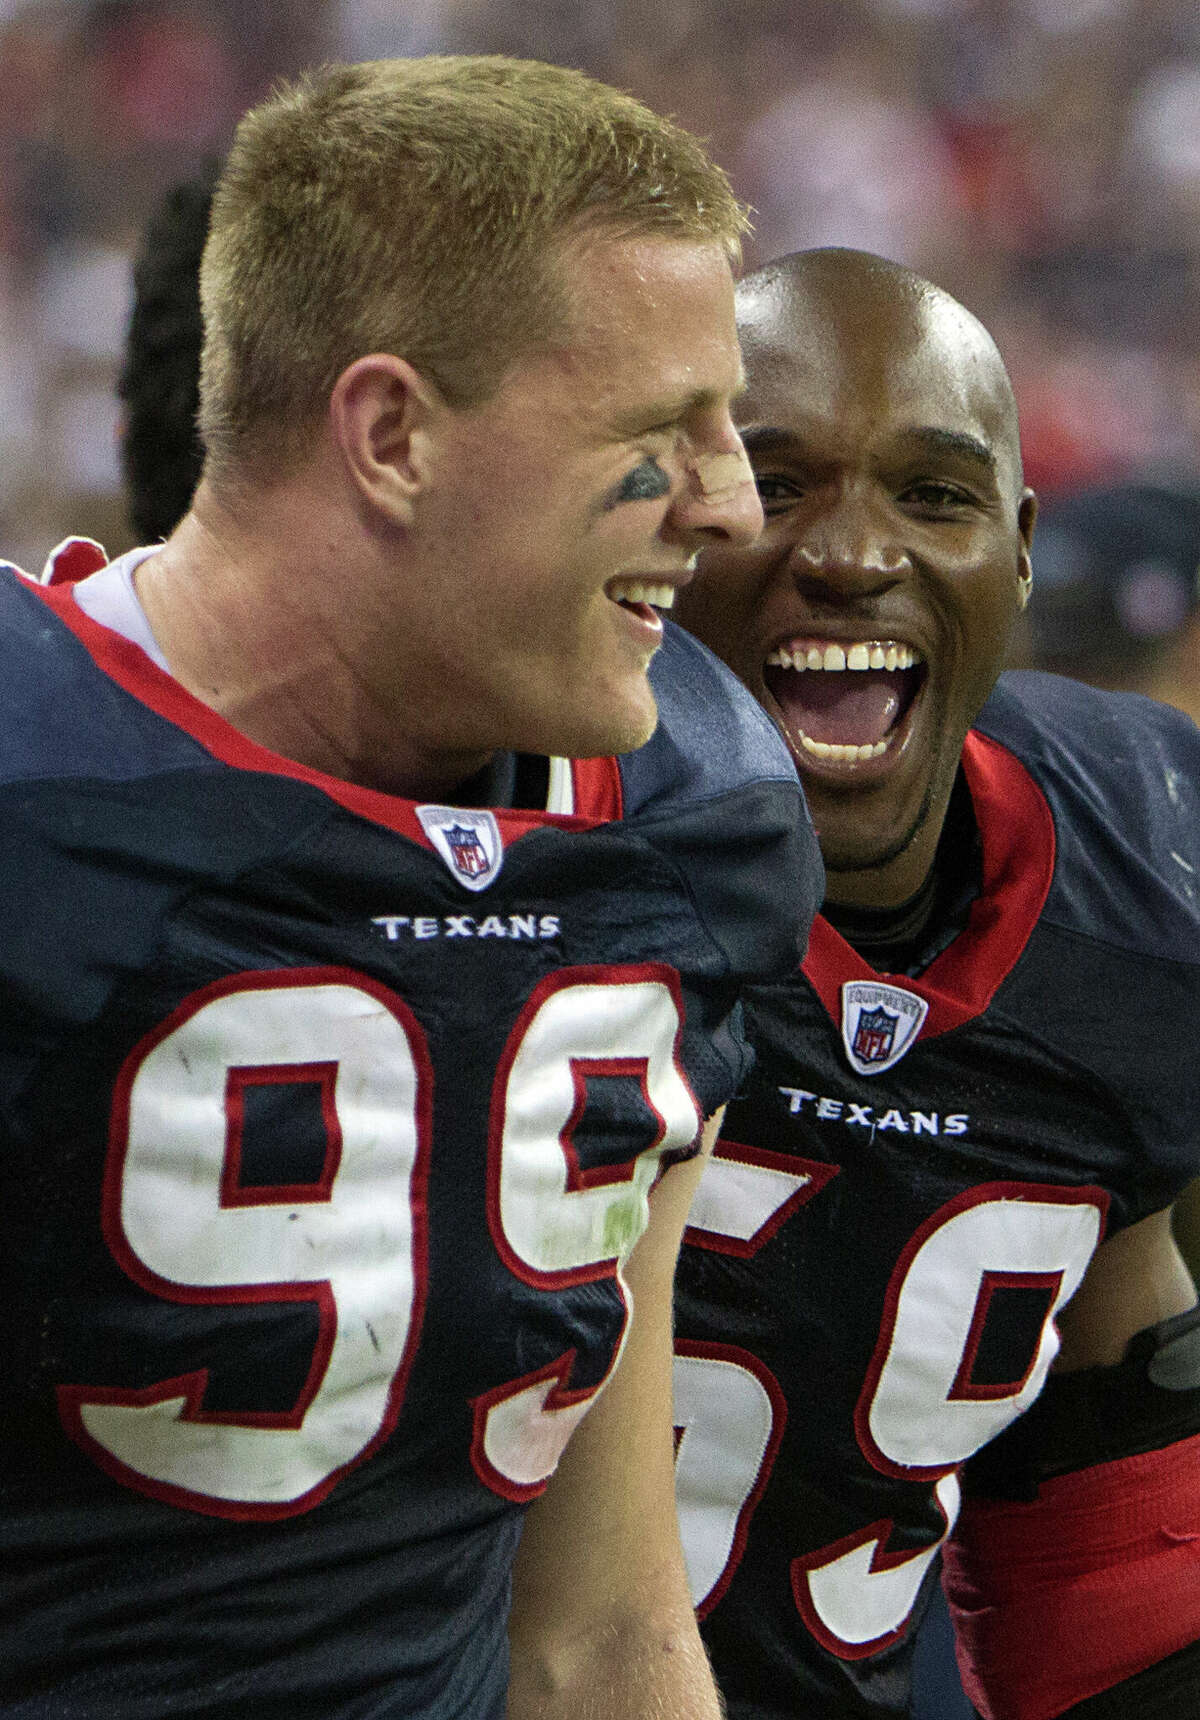 Houston Texans defensive end J.J. Watt (99) celebrates with inside linebacker DeMeco Ryans (59) during the fourth quarter of an AFC wildcard playoff football game against the Cincinnati Bengals at Reliant Stadium on Saturday, Jan. 7, 2012, in Houston. The Texans won 31-10.